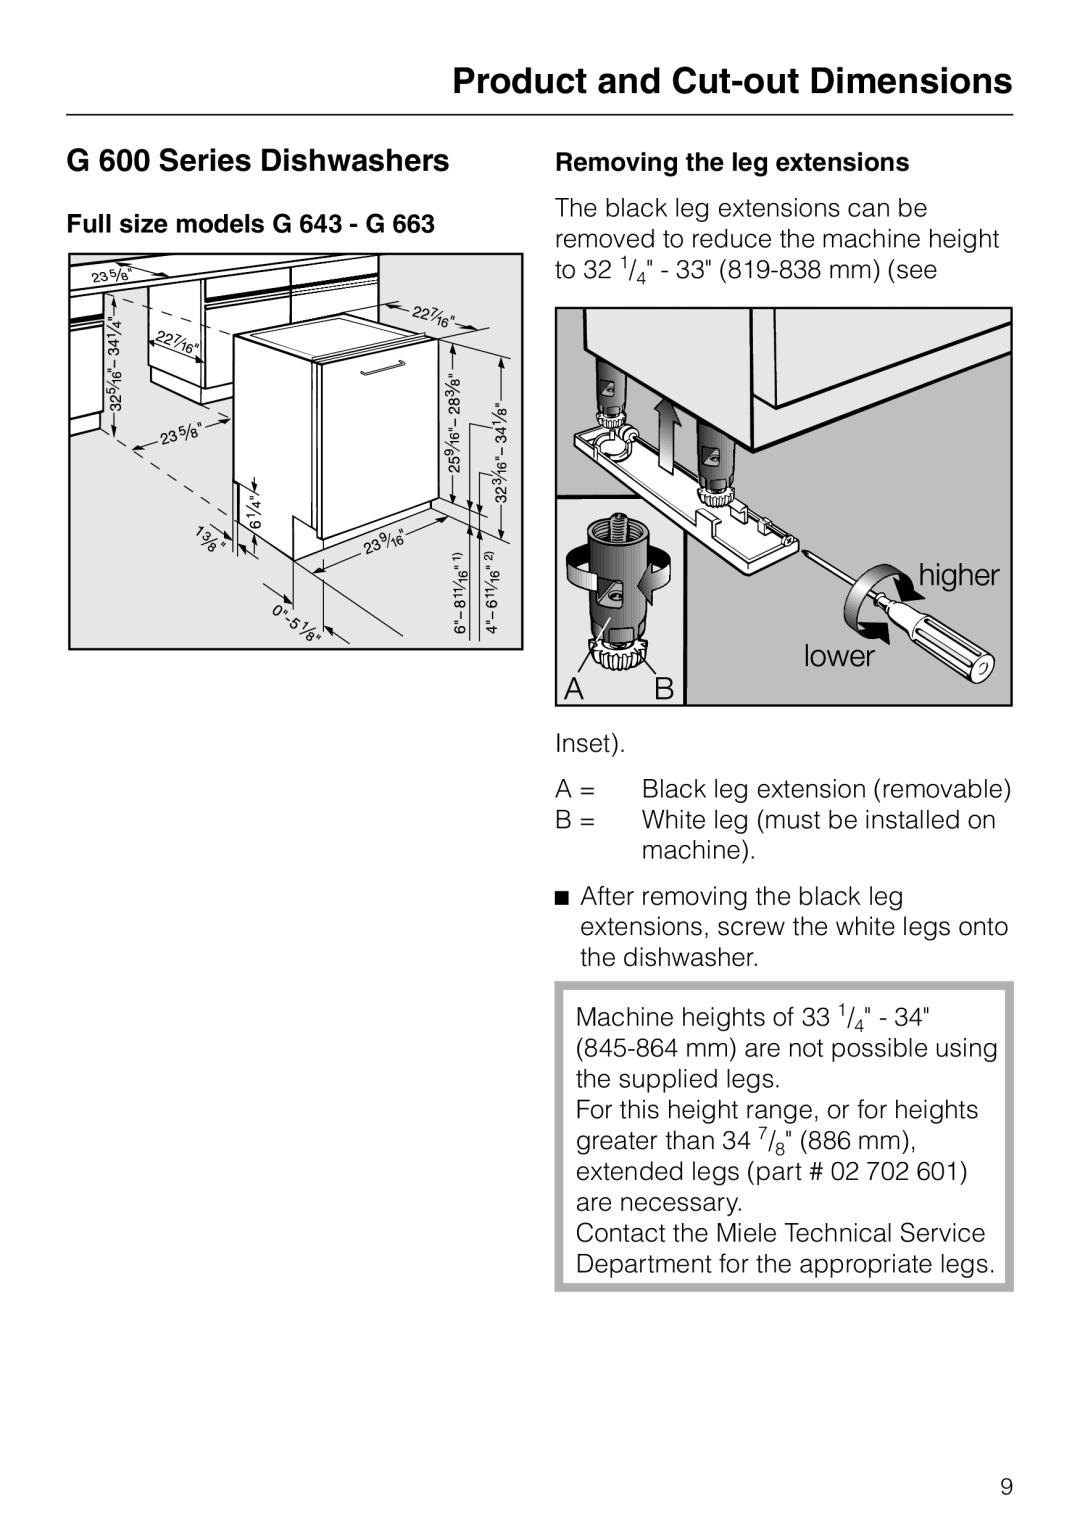 Miele HG01 installation instructions Product and Cut-outDimensions, G 600 Series Dishwashers, Full size models G 643 - G 